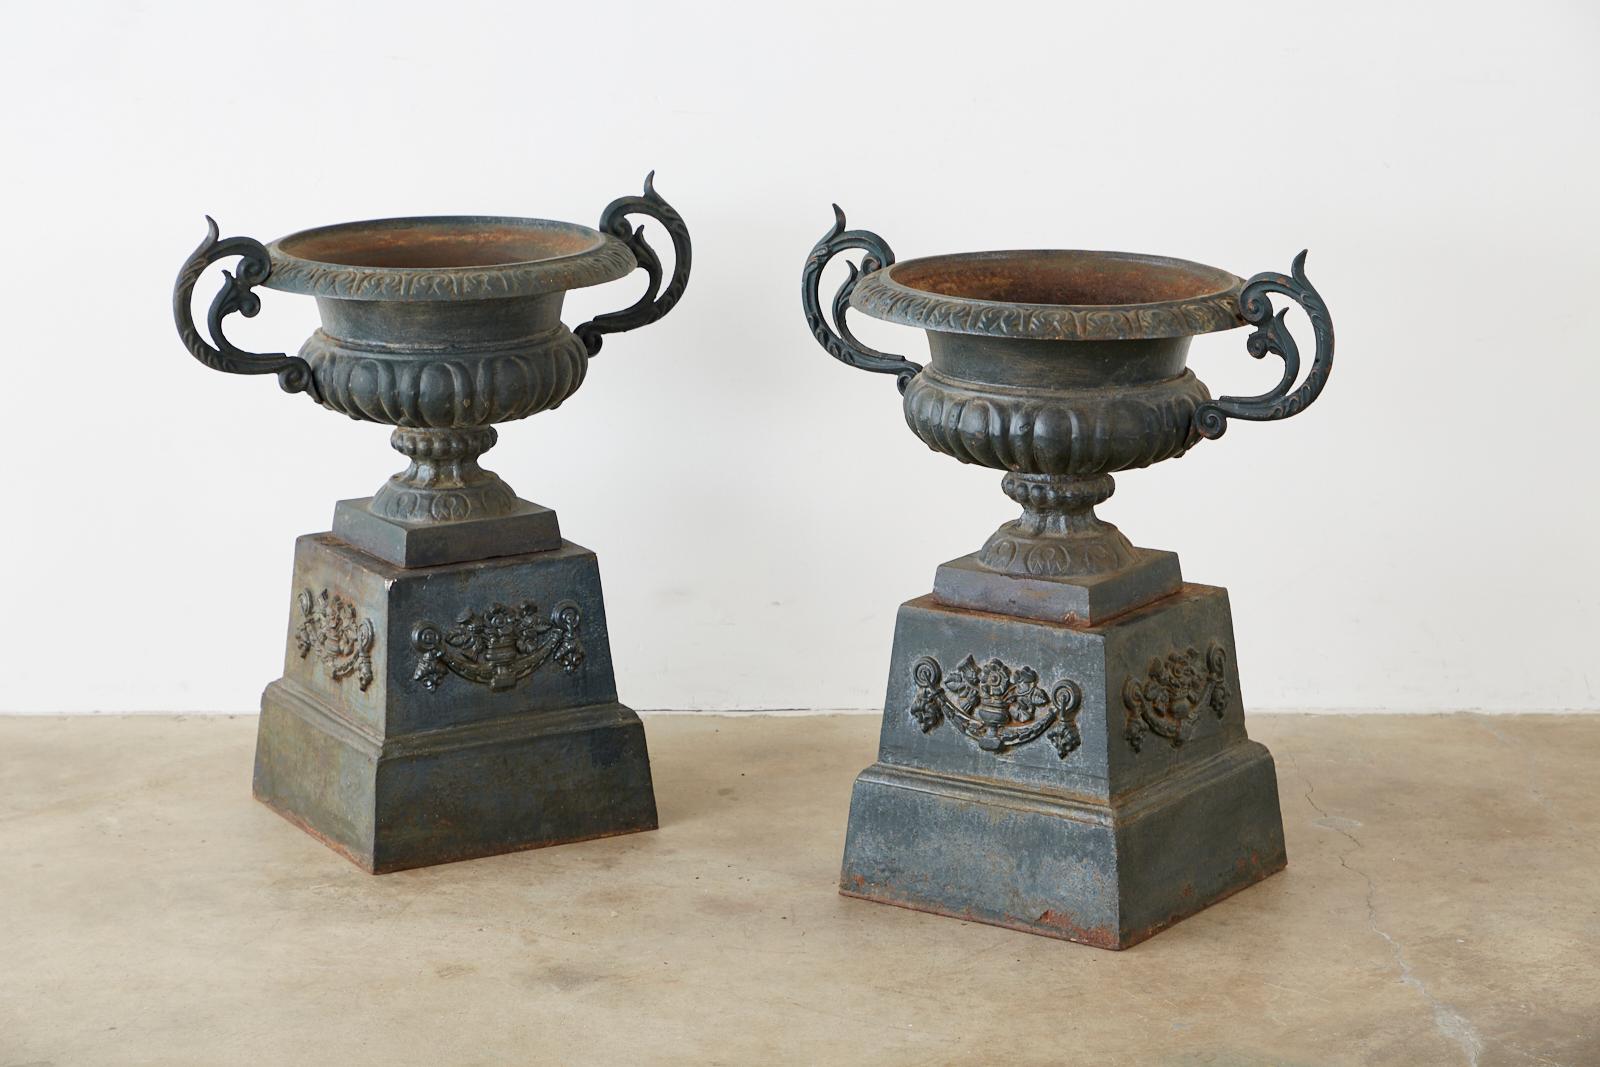 Large pair of 19th century French cast iron garden urns or jardinière planters on pedestals. The jardinières feature large scrolled handles on each side. Each urn sits atop a stepped pedestal base decorated with floral and acanthus swag in the